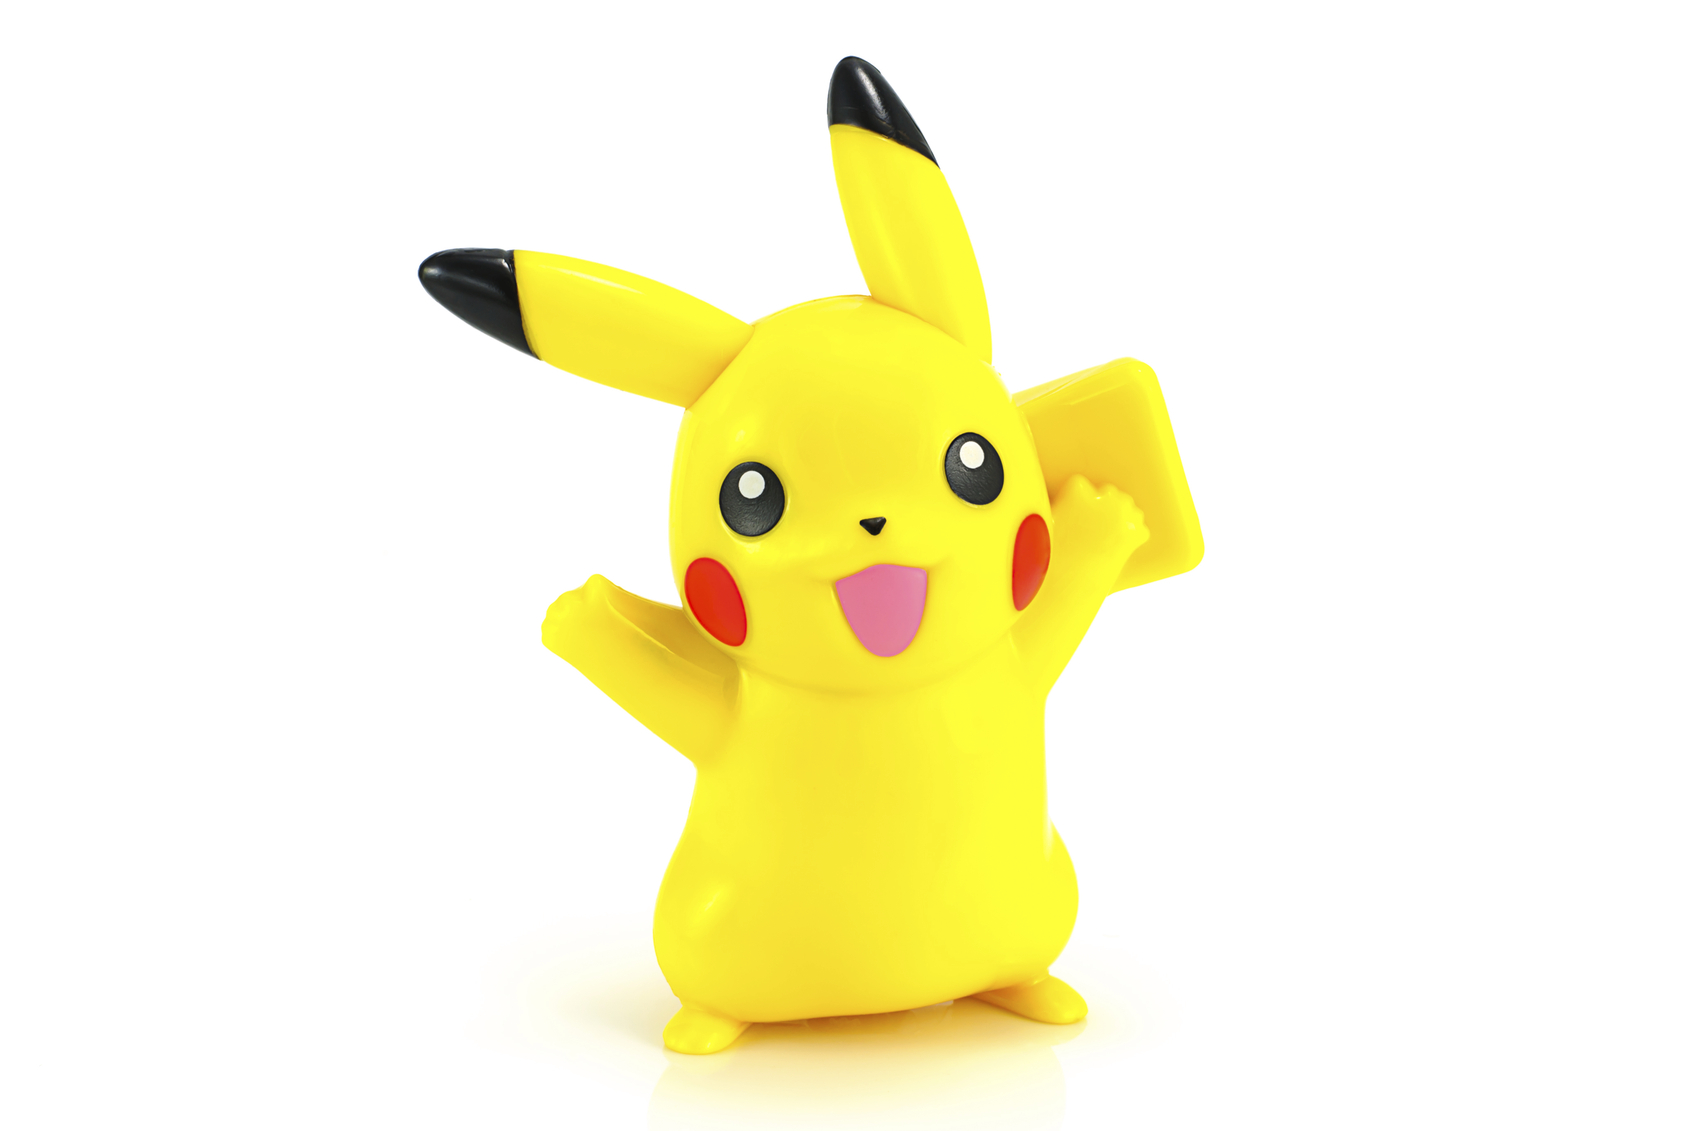 Bangkok,Thailand - October 30, 2014: Pickachu toy character from Pokemon anime. There are toy sold as part of McDonald HappyMeal toy.